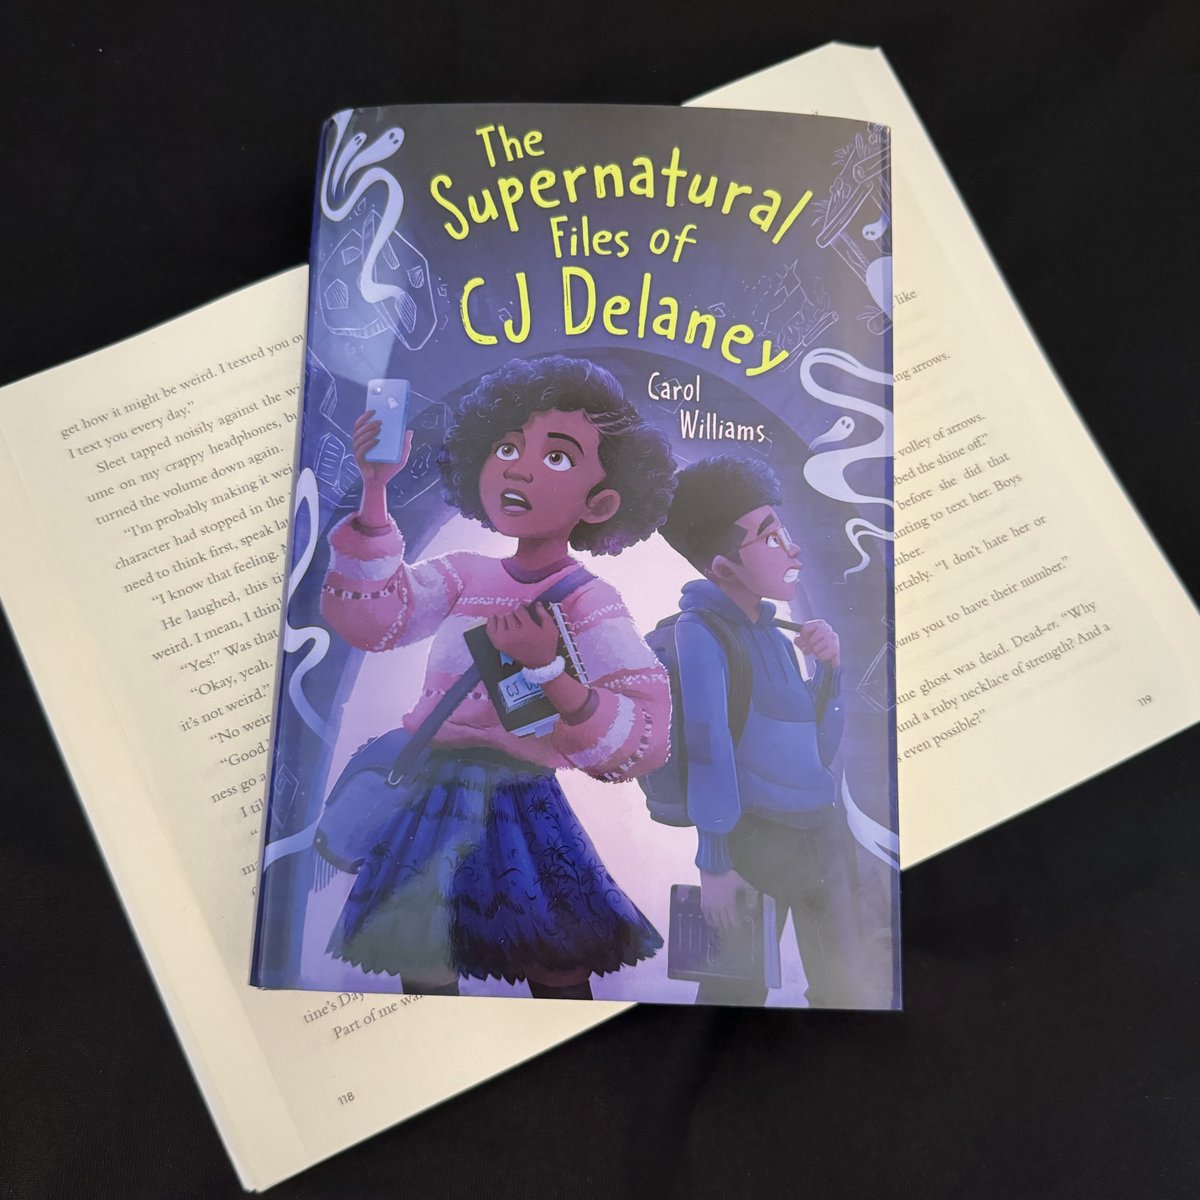 Happy book birthday to THE SUPERNATURAL FILES OF CJ DELANEY! This #mglit mystery about a girl saving her town from evil is on shelves today! ow.ly/qgB450RxFXh #bookbirthday